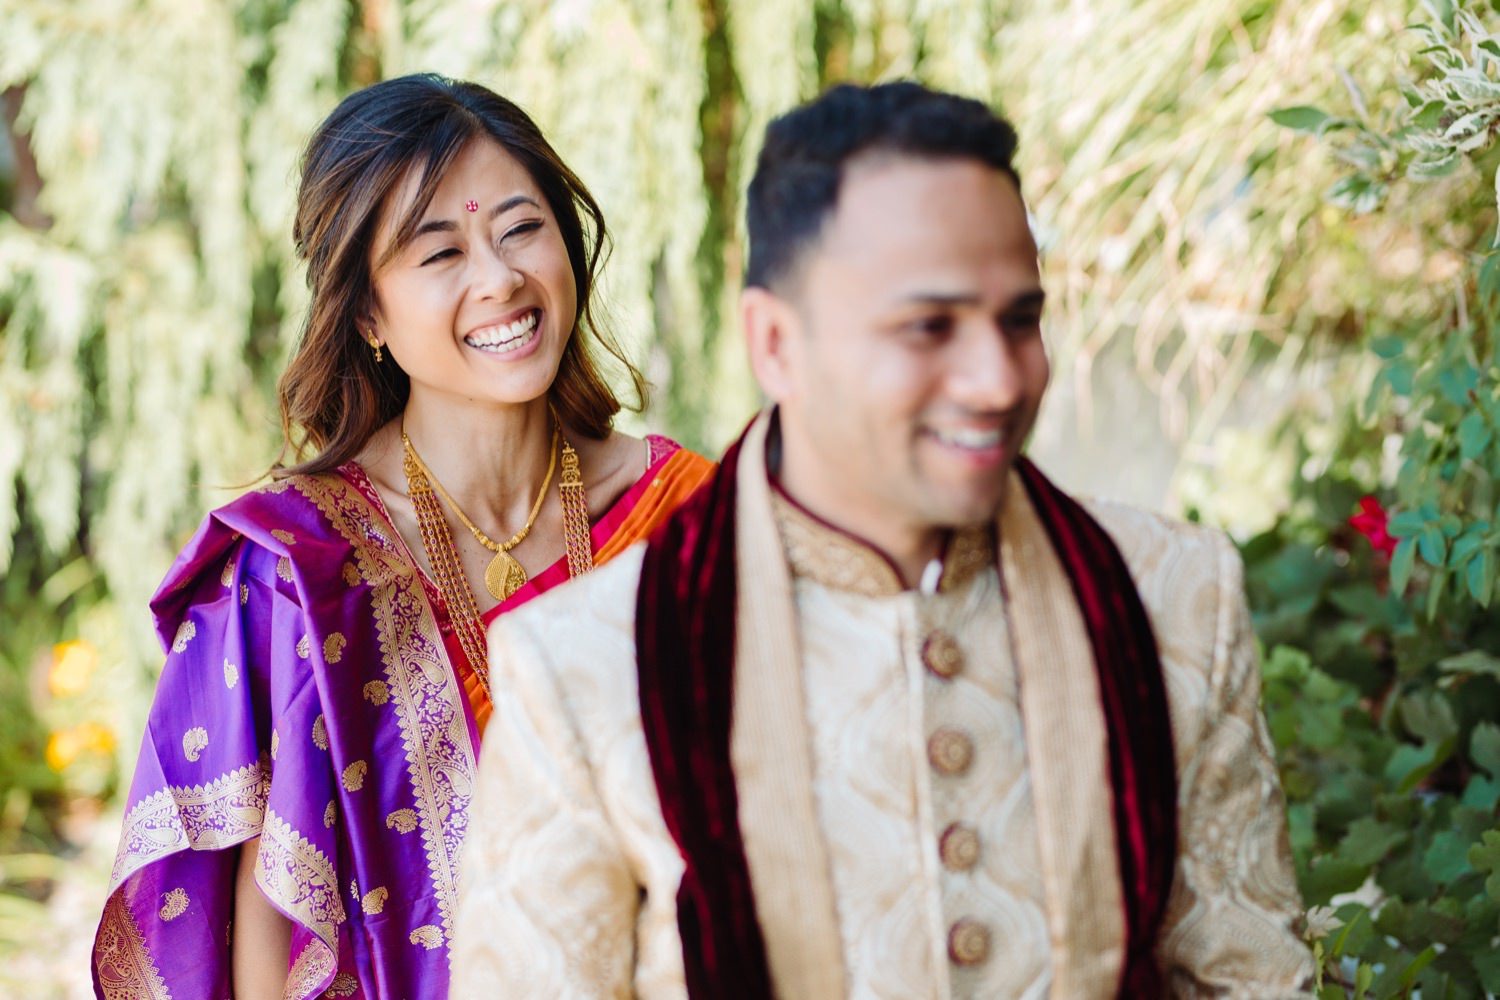 couple at their first look in Indian wedding attire